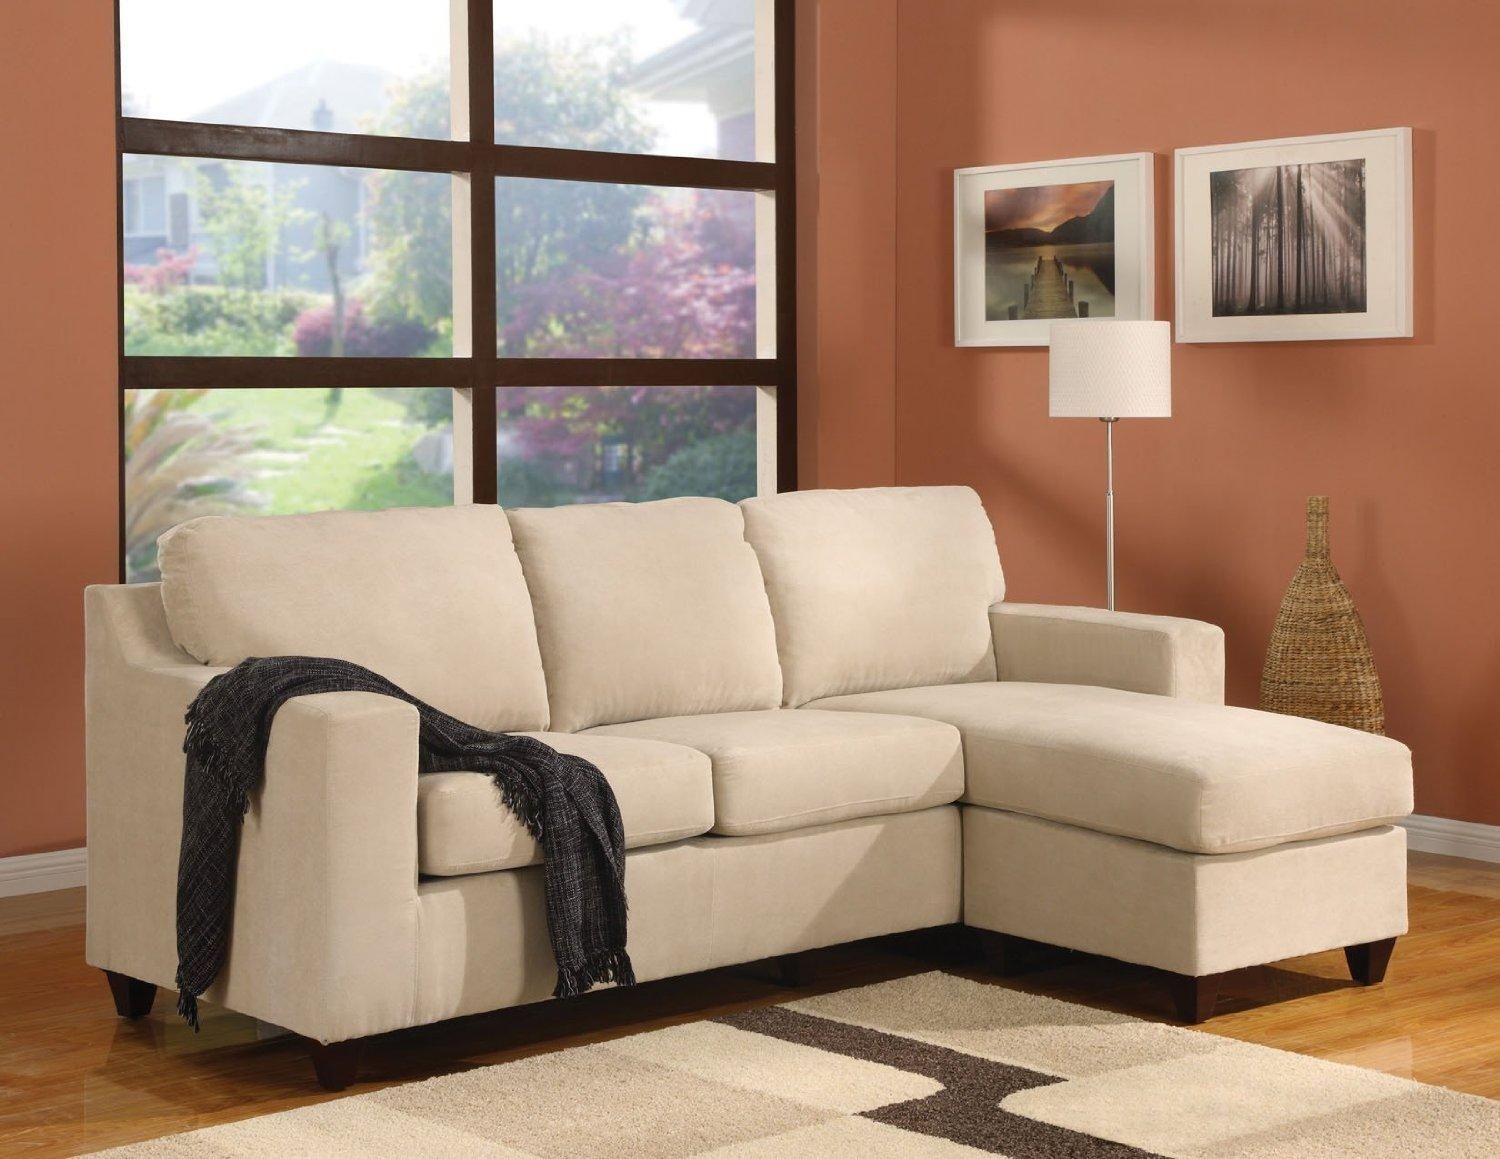 Sofas Center : Small Sofa With Chaise Sectional And Reclinersmall With Regard To Small Sofas With Chaise Lounge (View 1 of 20)